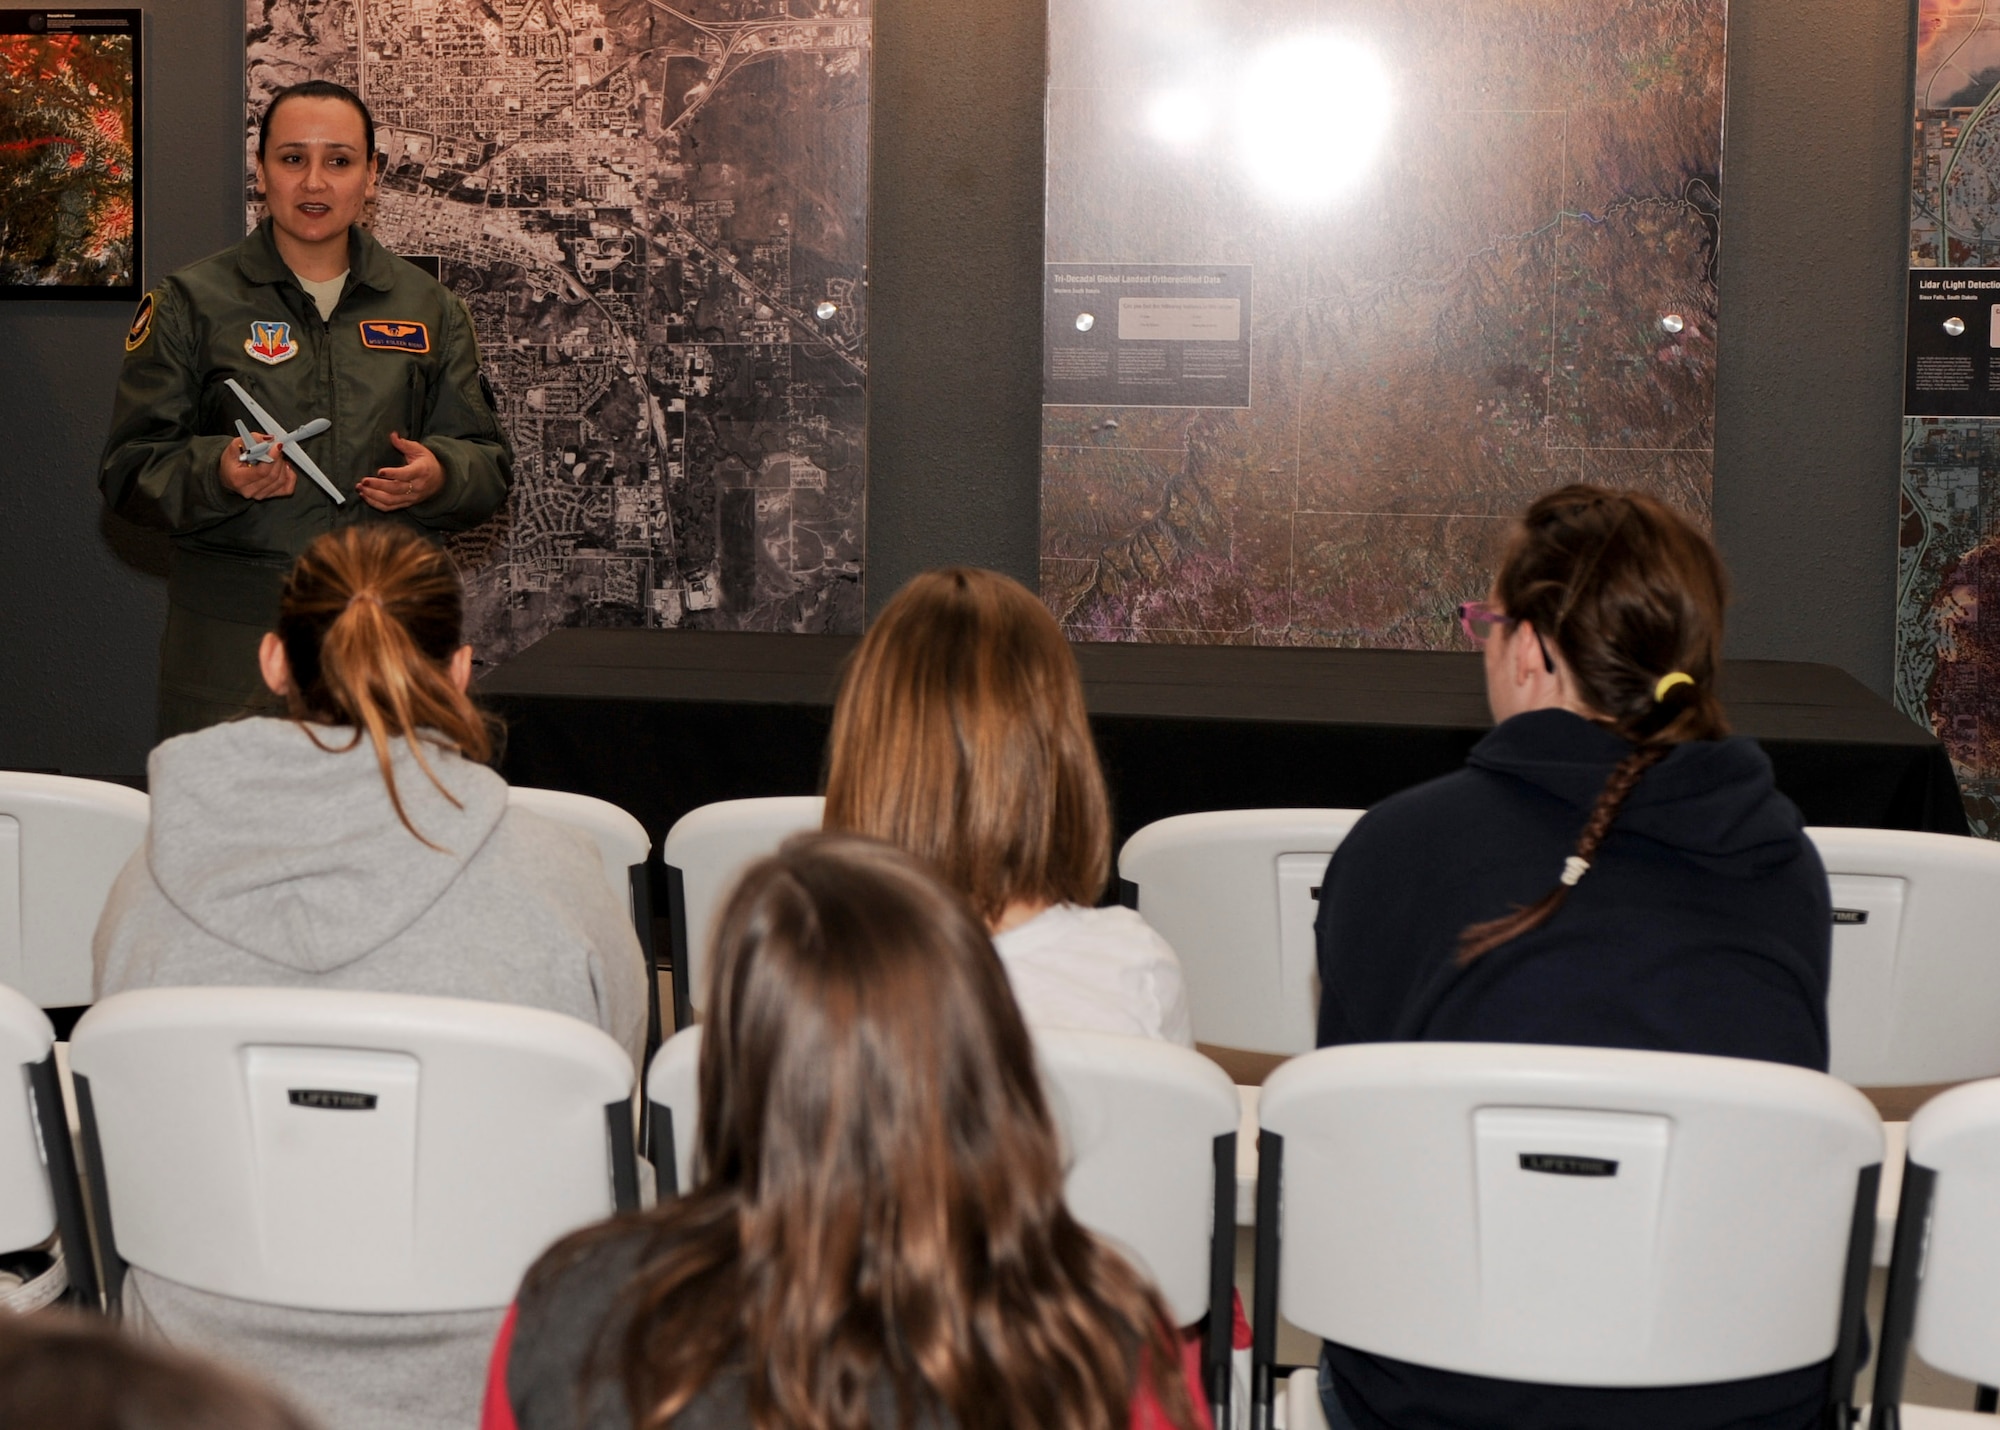 Master Sgt. Koleen Riggs, 432nd Attack Squadron sensor operator, speaks about her career during the Women of Aviation event at the South Dakota Air and Space Museum in Box Elder, S.D., March 9, 2013. Riggs has been an MQ-9 Reaper sensor operator for the last two and one half years, where she employs airborne to actively or passively acquire, track and monitor airborne, maritime and ground objects. (U.S. Air Force photo by Airman 1st Class Anania Tekurio/Released)